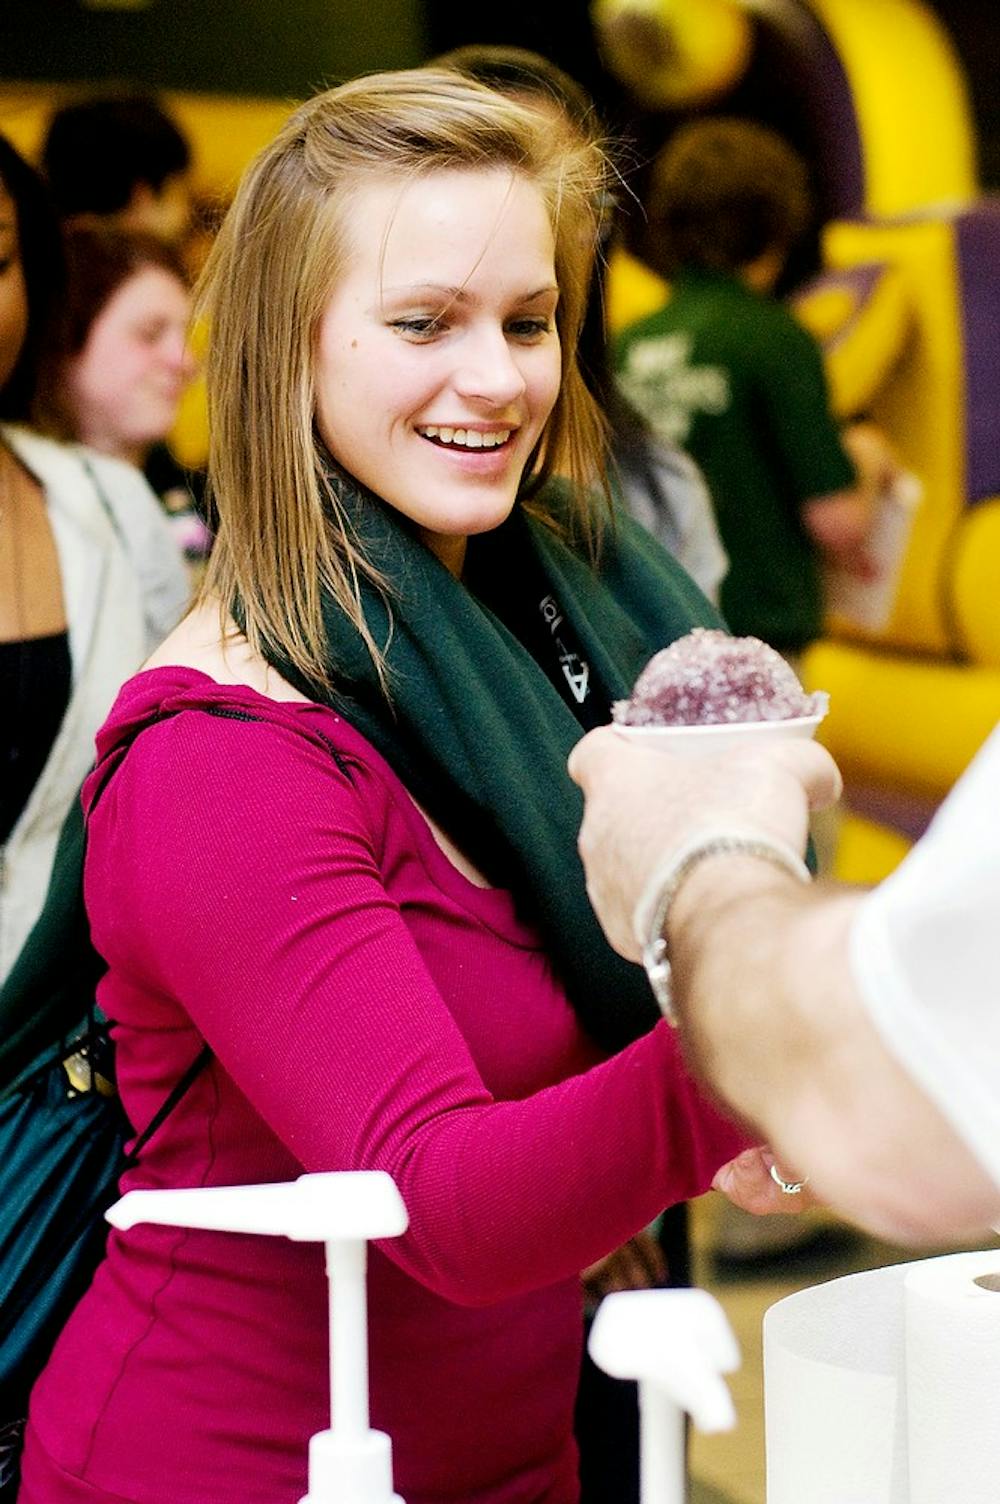 	<p>Medical technician junior Amber Suttorp gets a snow cone in April 2012 at Sparty&#8217;s Spring Party held at the International Center, 427 North Shaw Lane. <span class="caps">ASMSU</span>, <span class="caps">MSU</span>&#8217;s undergraduate student government, will vote on whether to allocate $2,000 to help fund the 2013 party. </p>